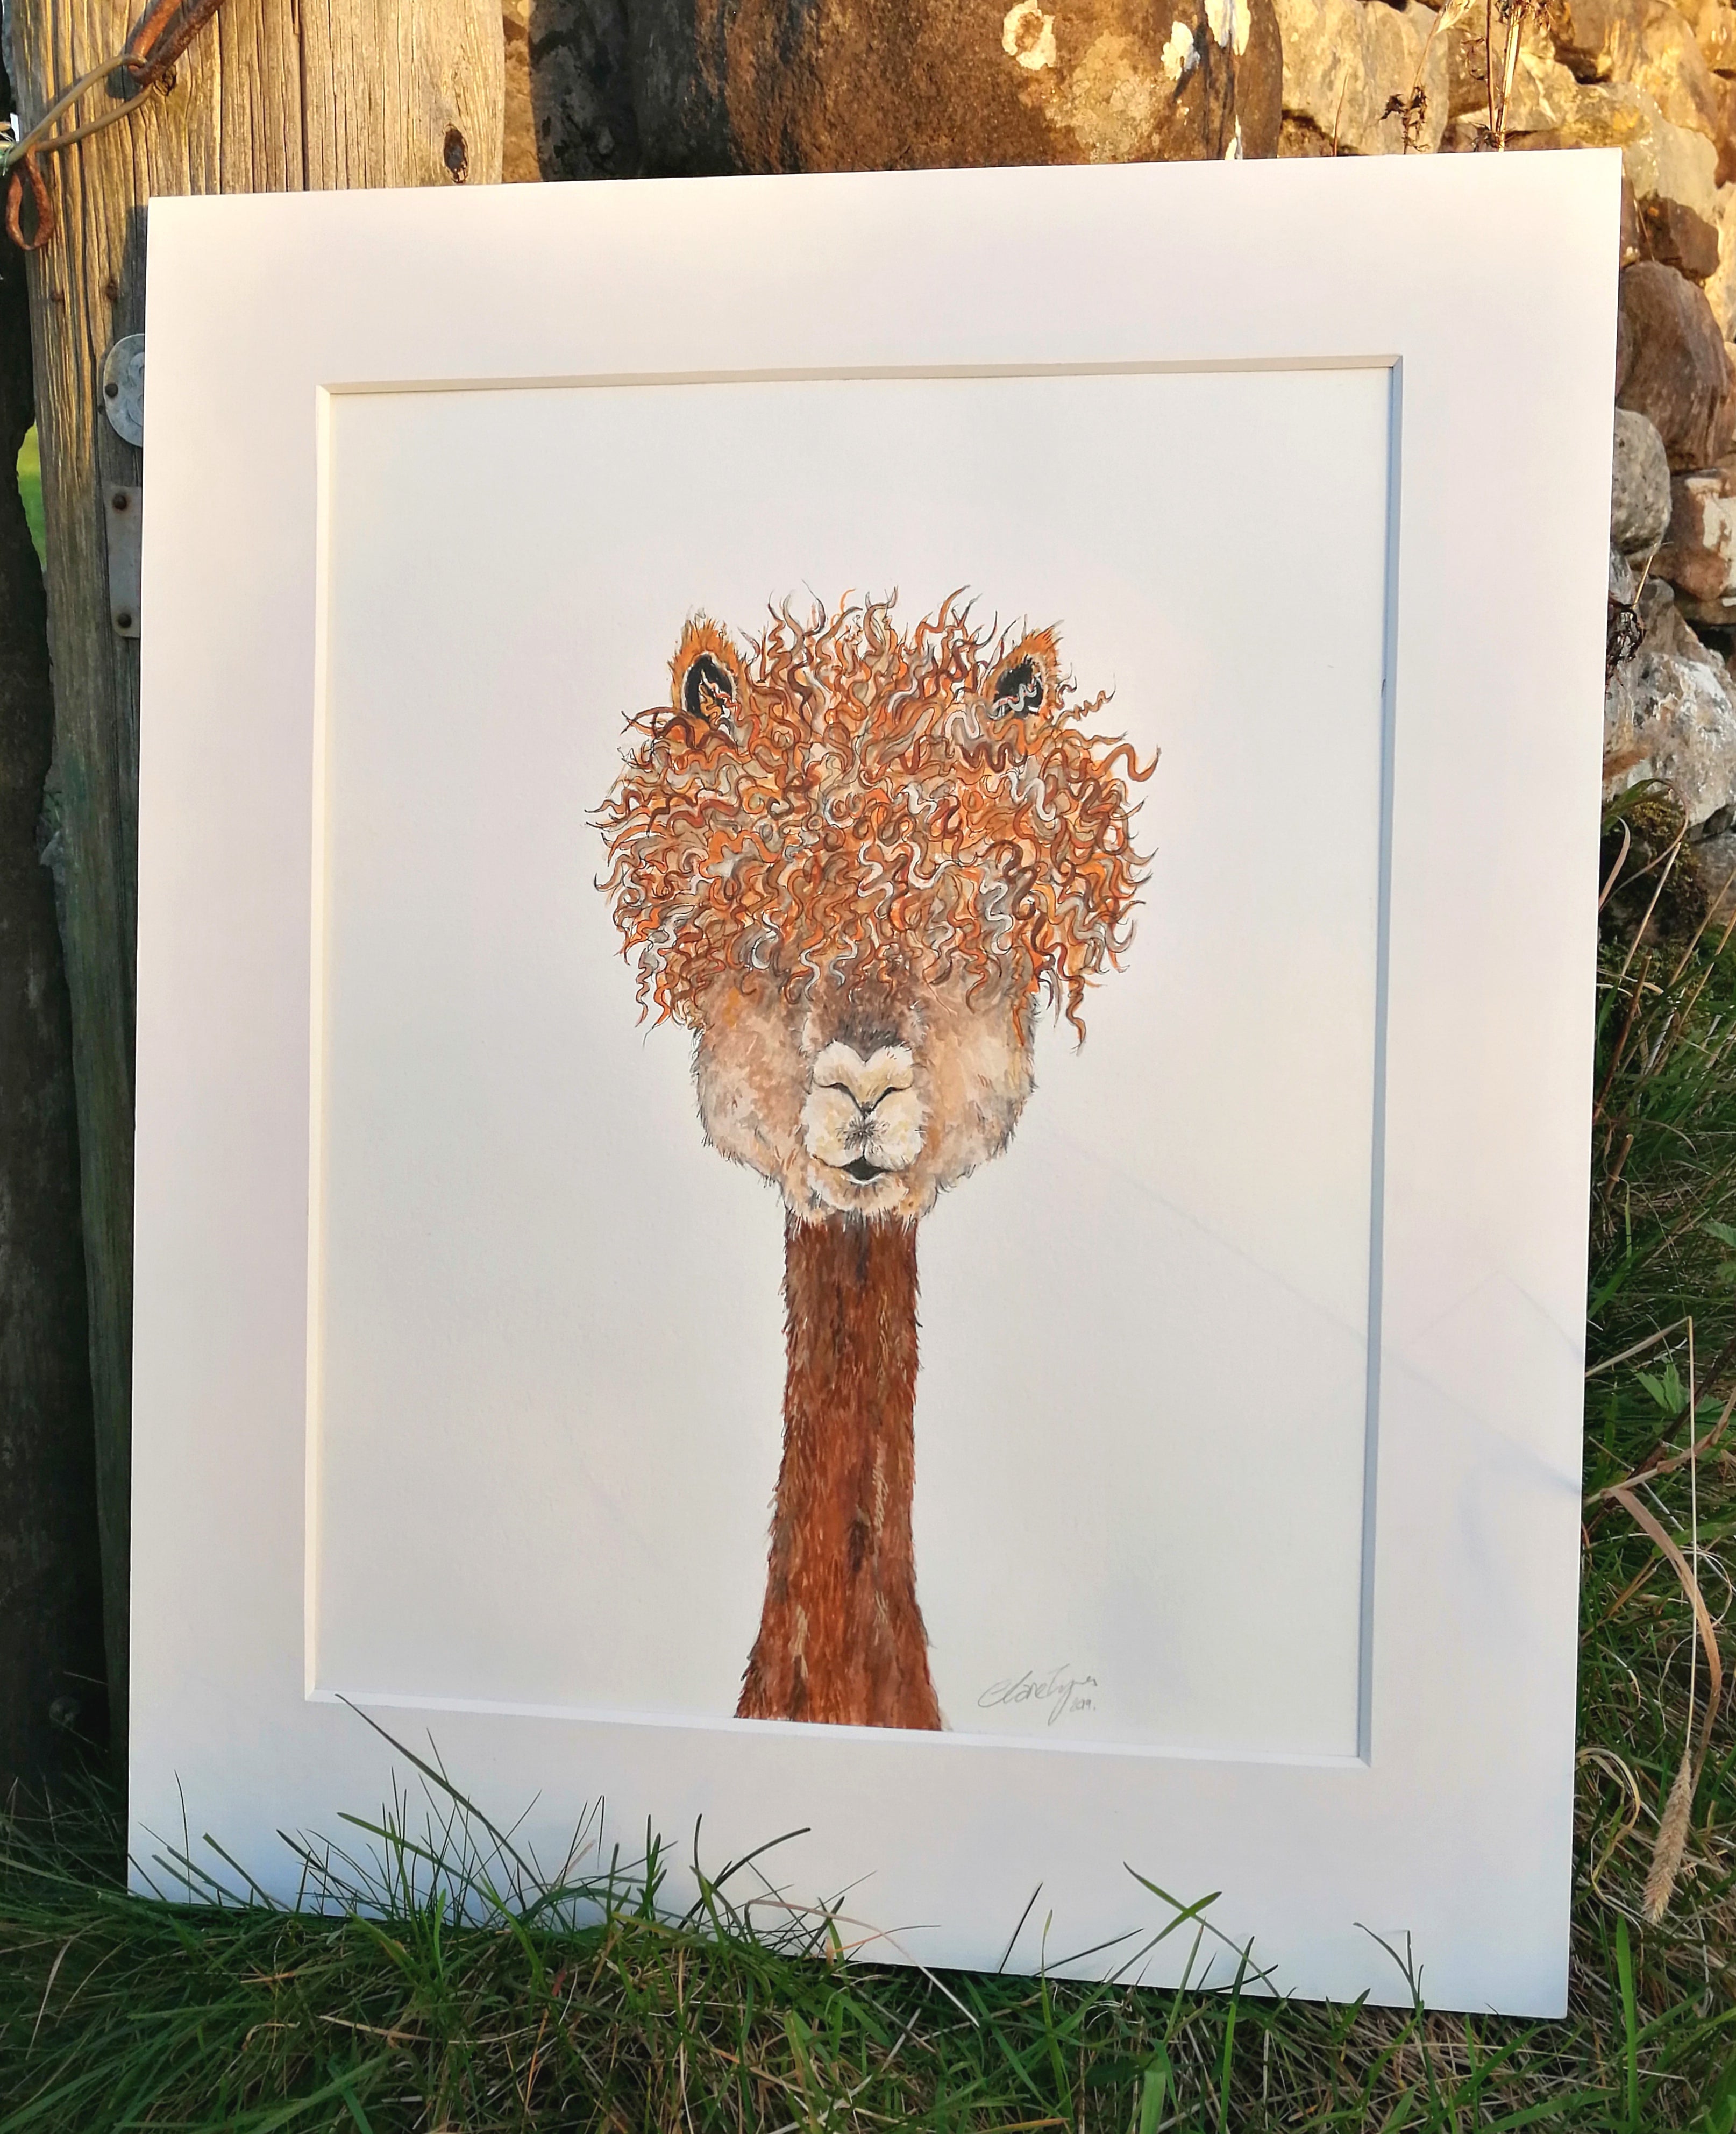 Brianna. The Alpaca.  A4 limited edition signed print.